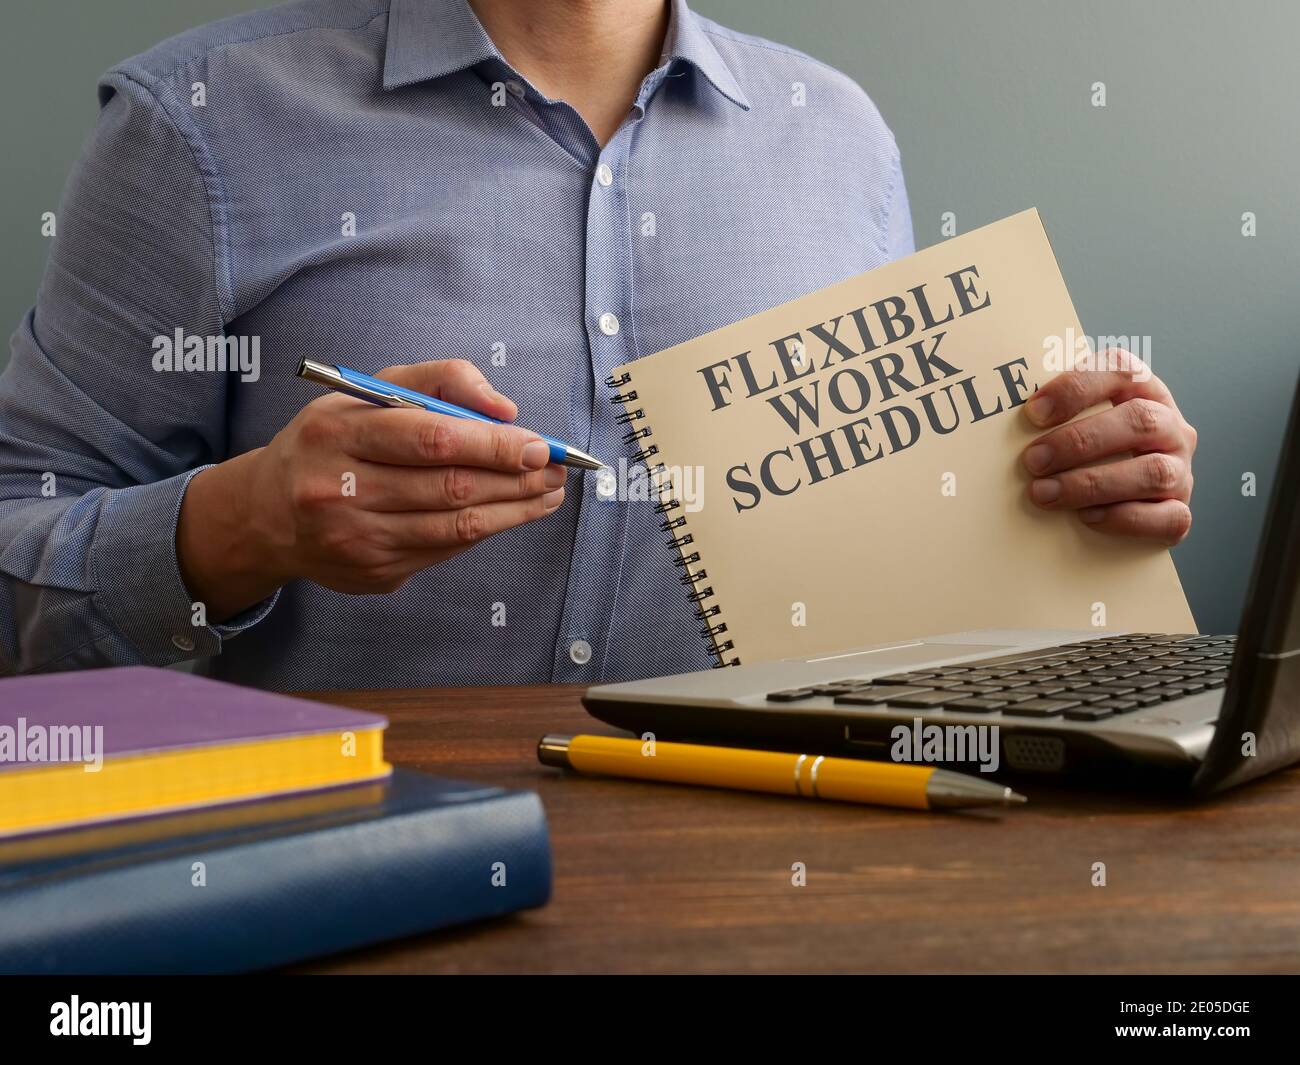 Man shows Flexible work schedule and offers a pen for filling. Stock Photo